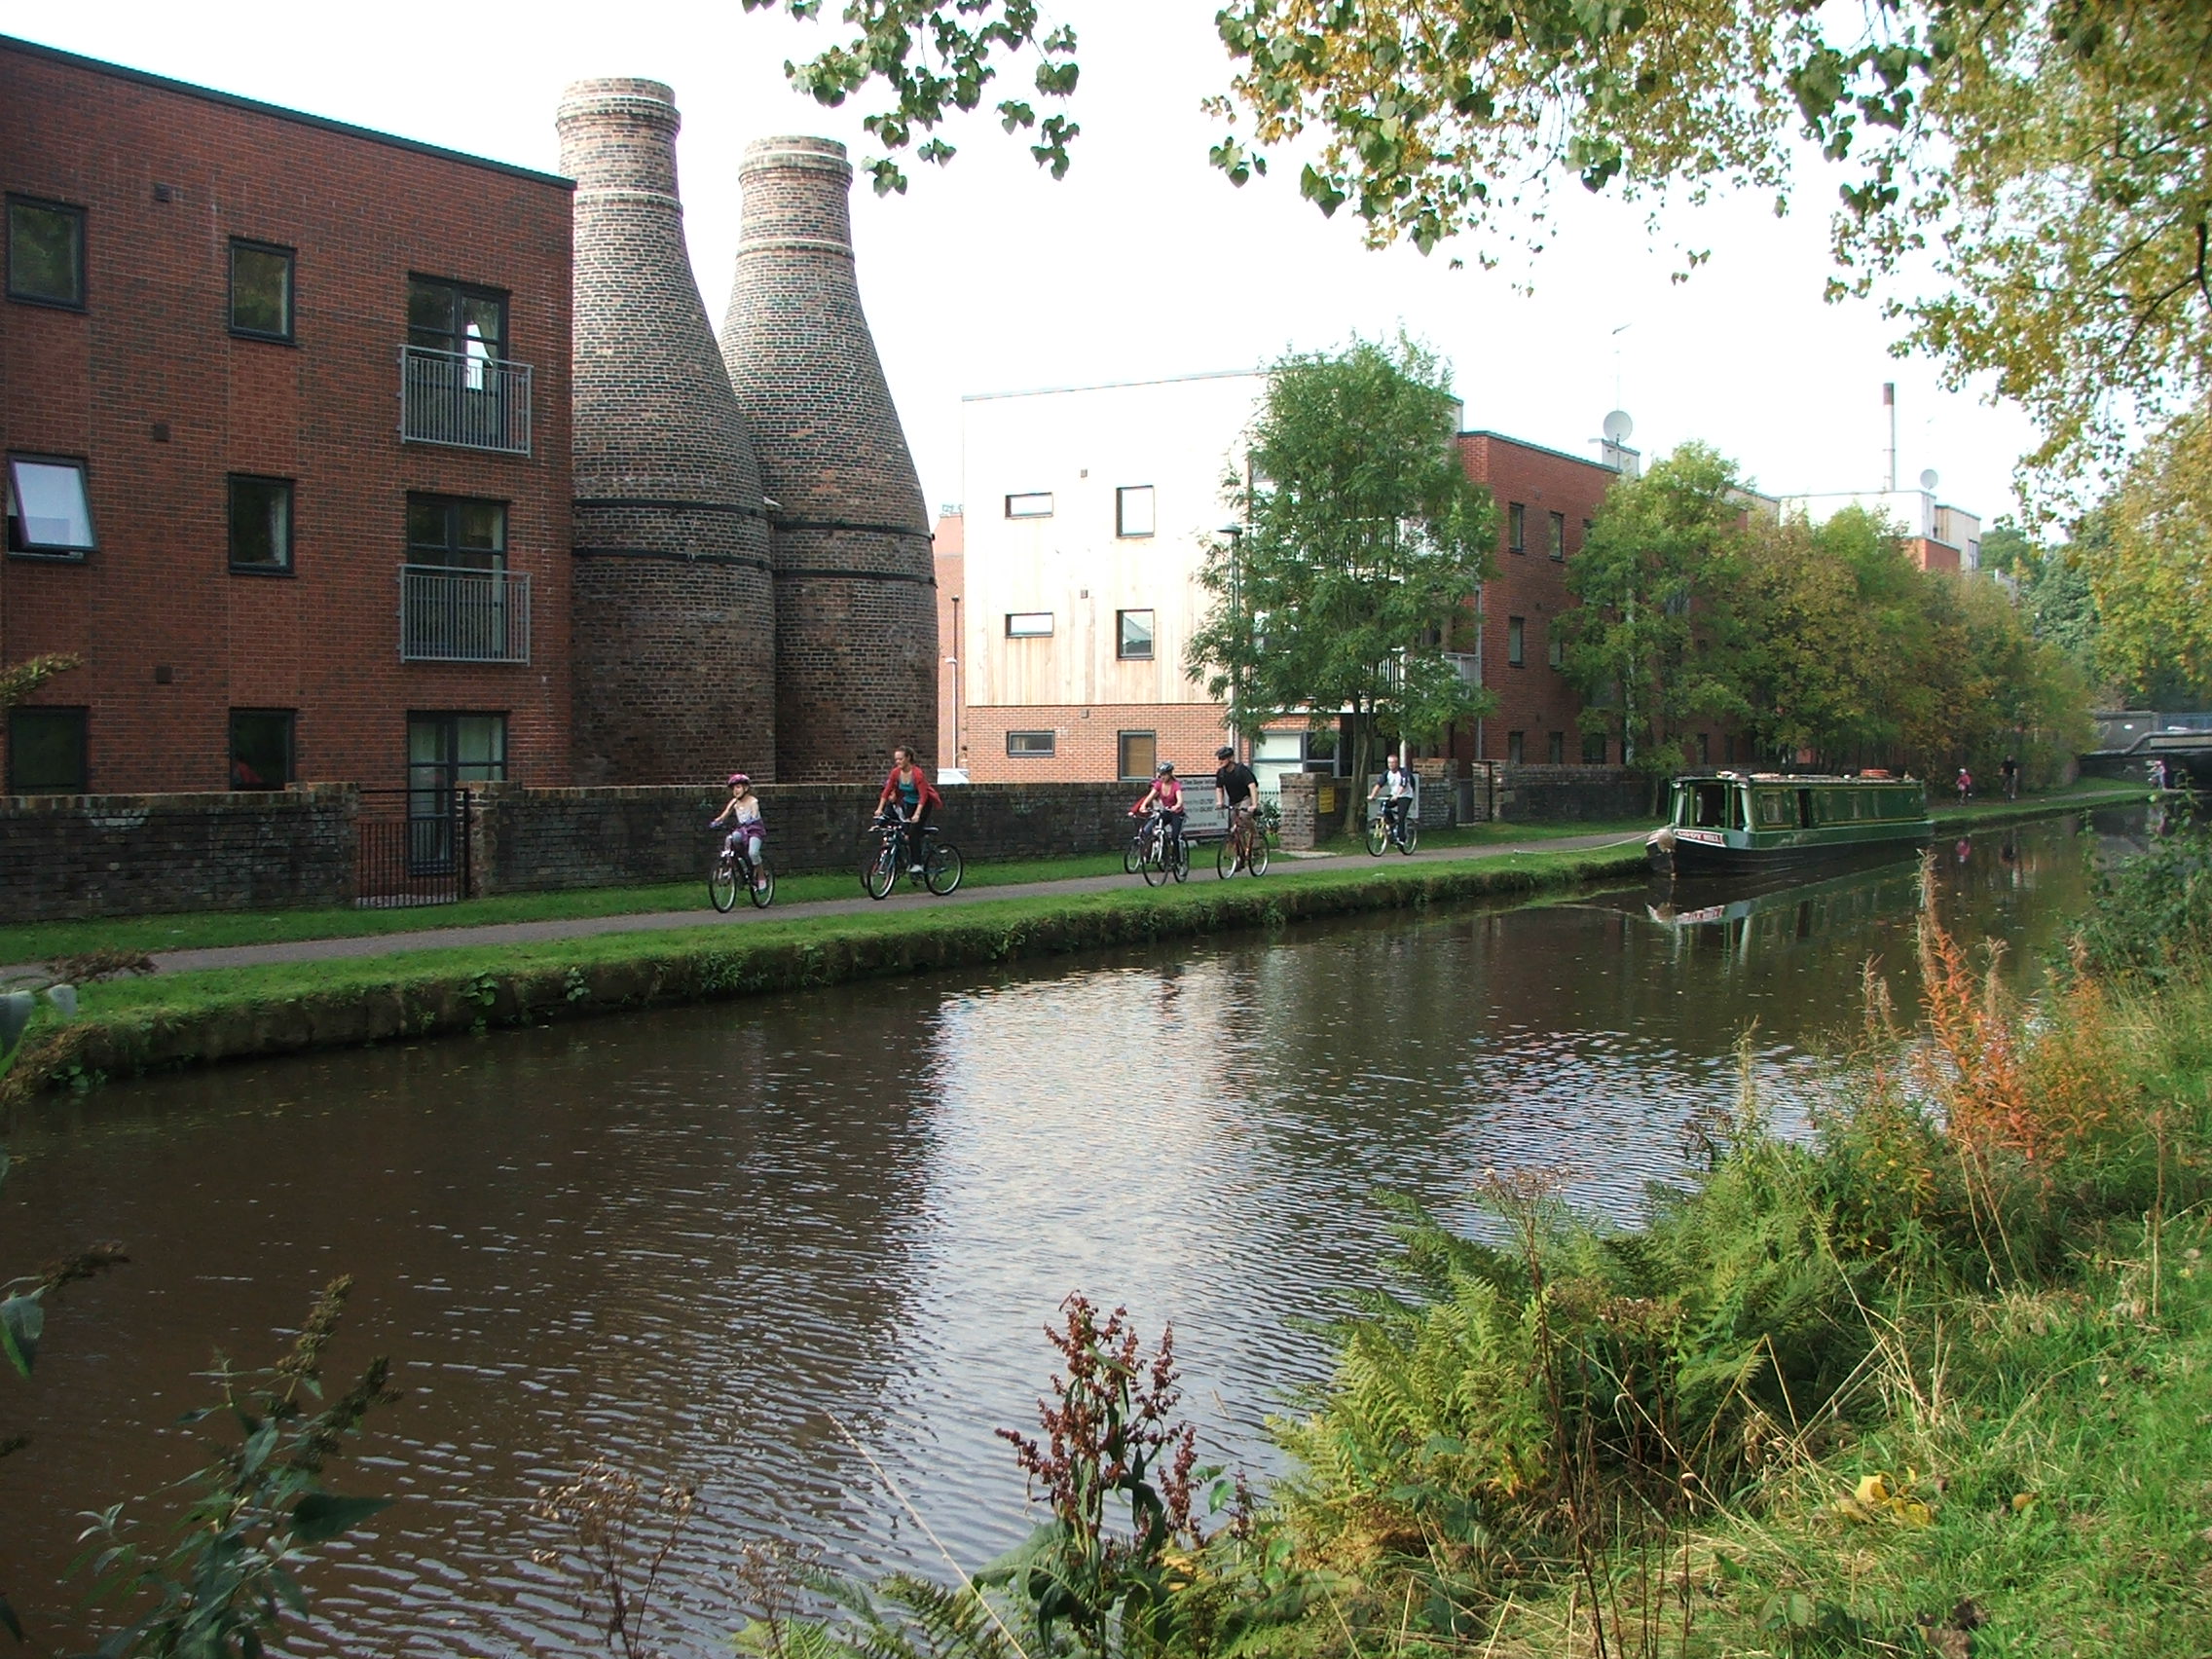 Bottle ovens and new flats in Stoke-on-Trent